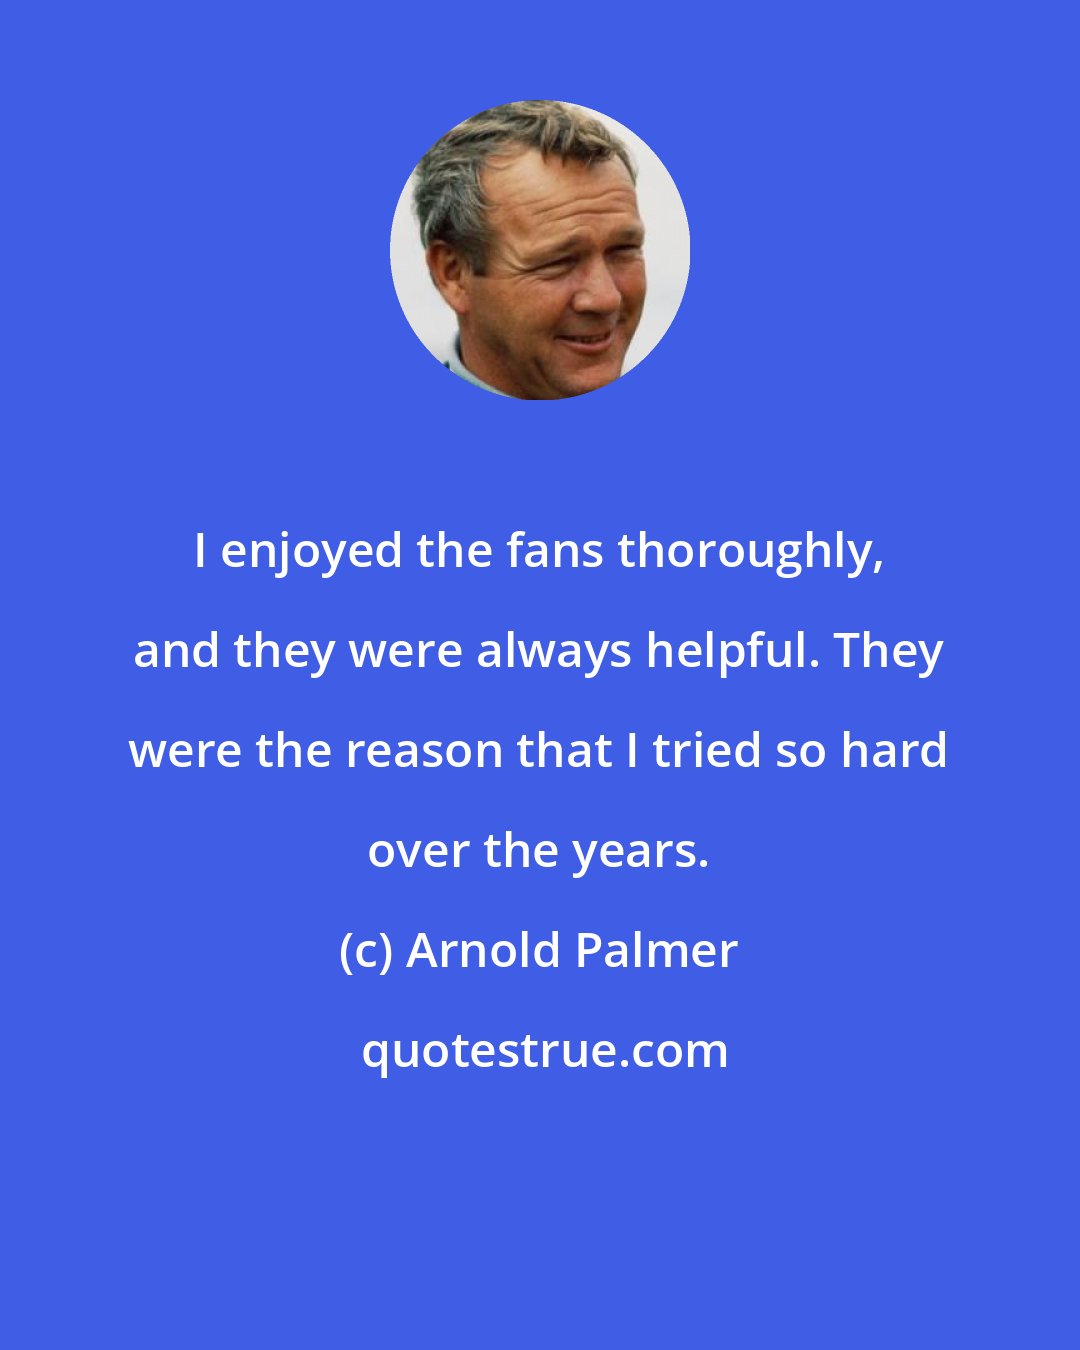 Arnold Palmer: I enjoyed the fans thoroughly, and they were always helpful. They were the reason that I tried so hard over the years.